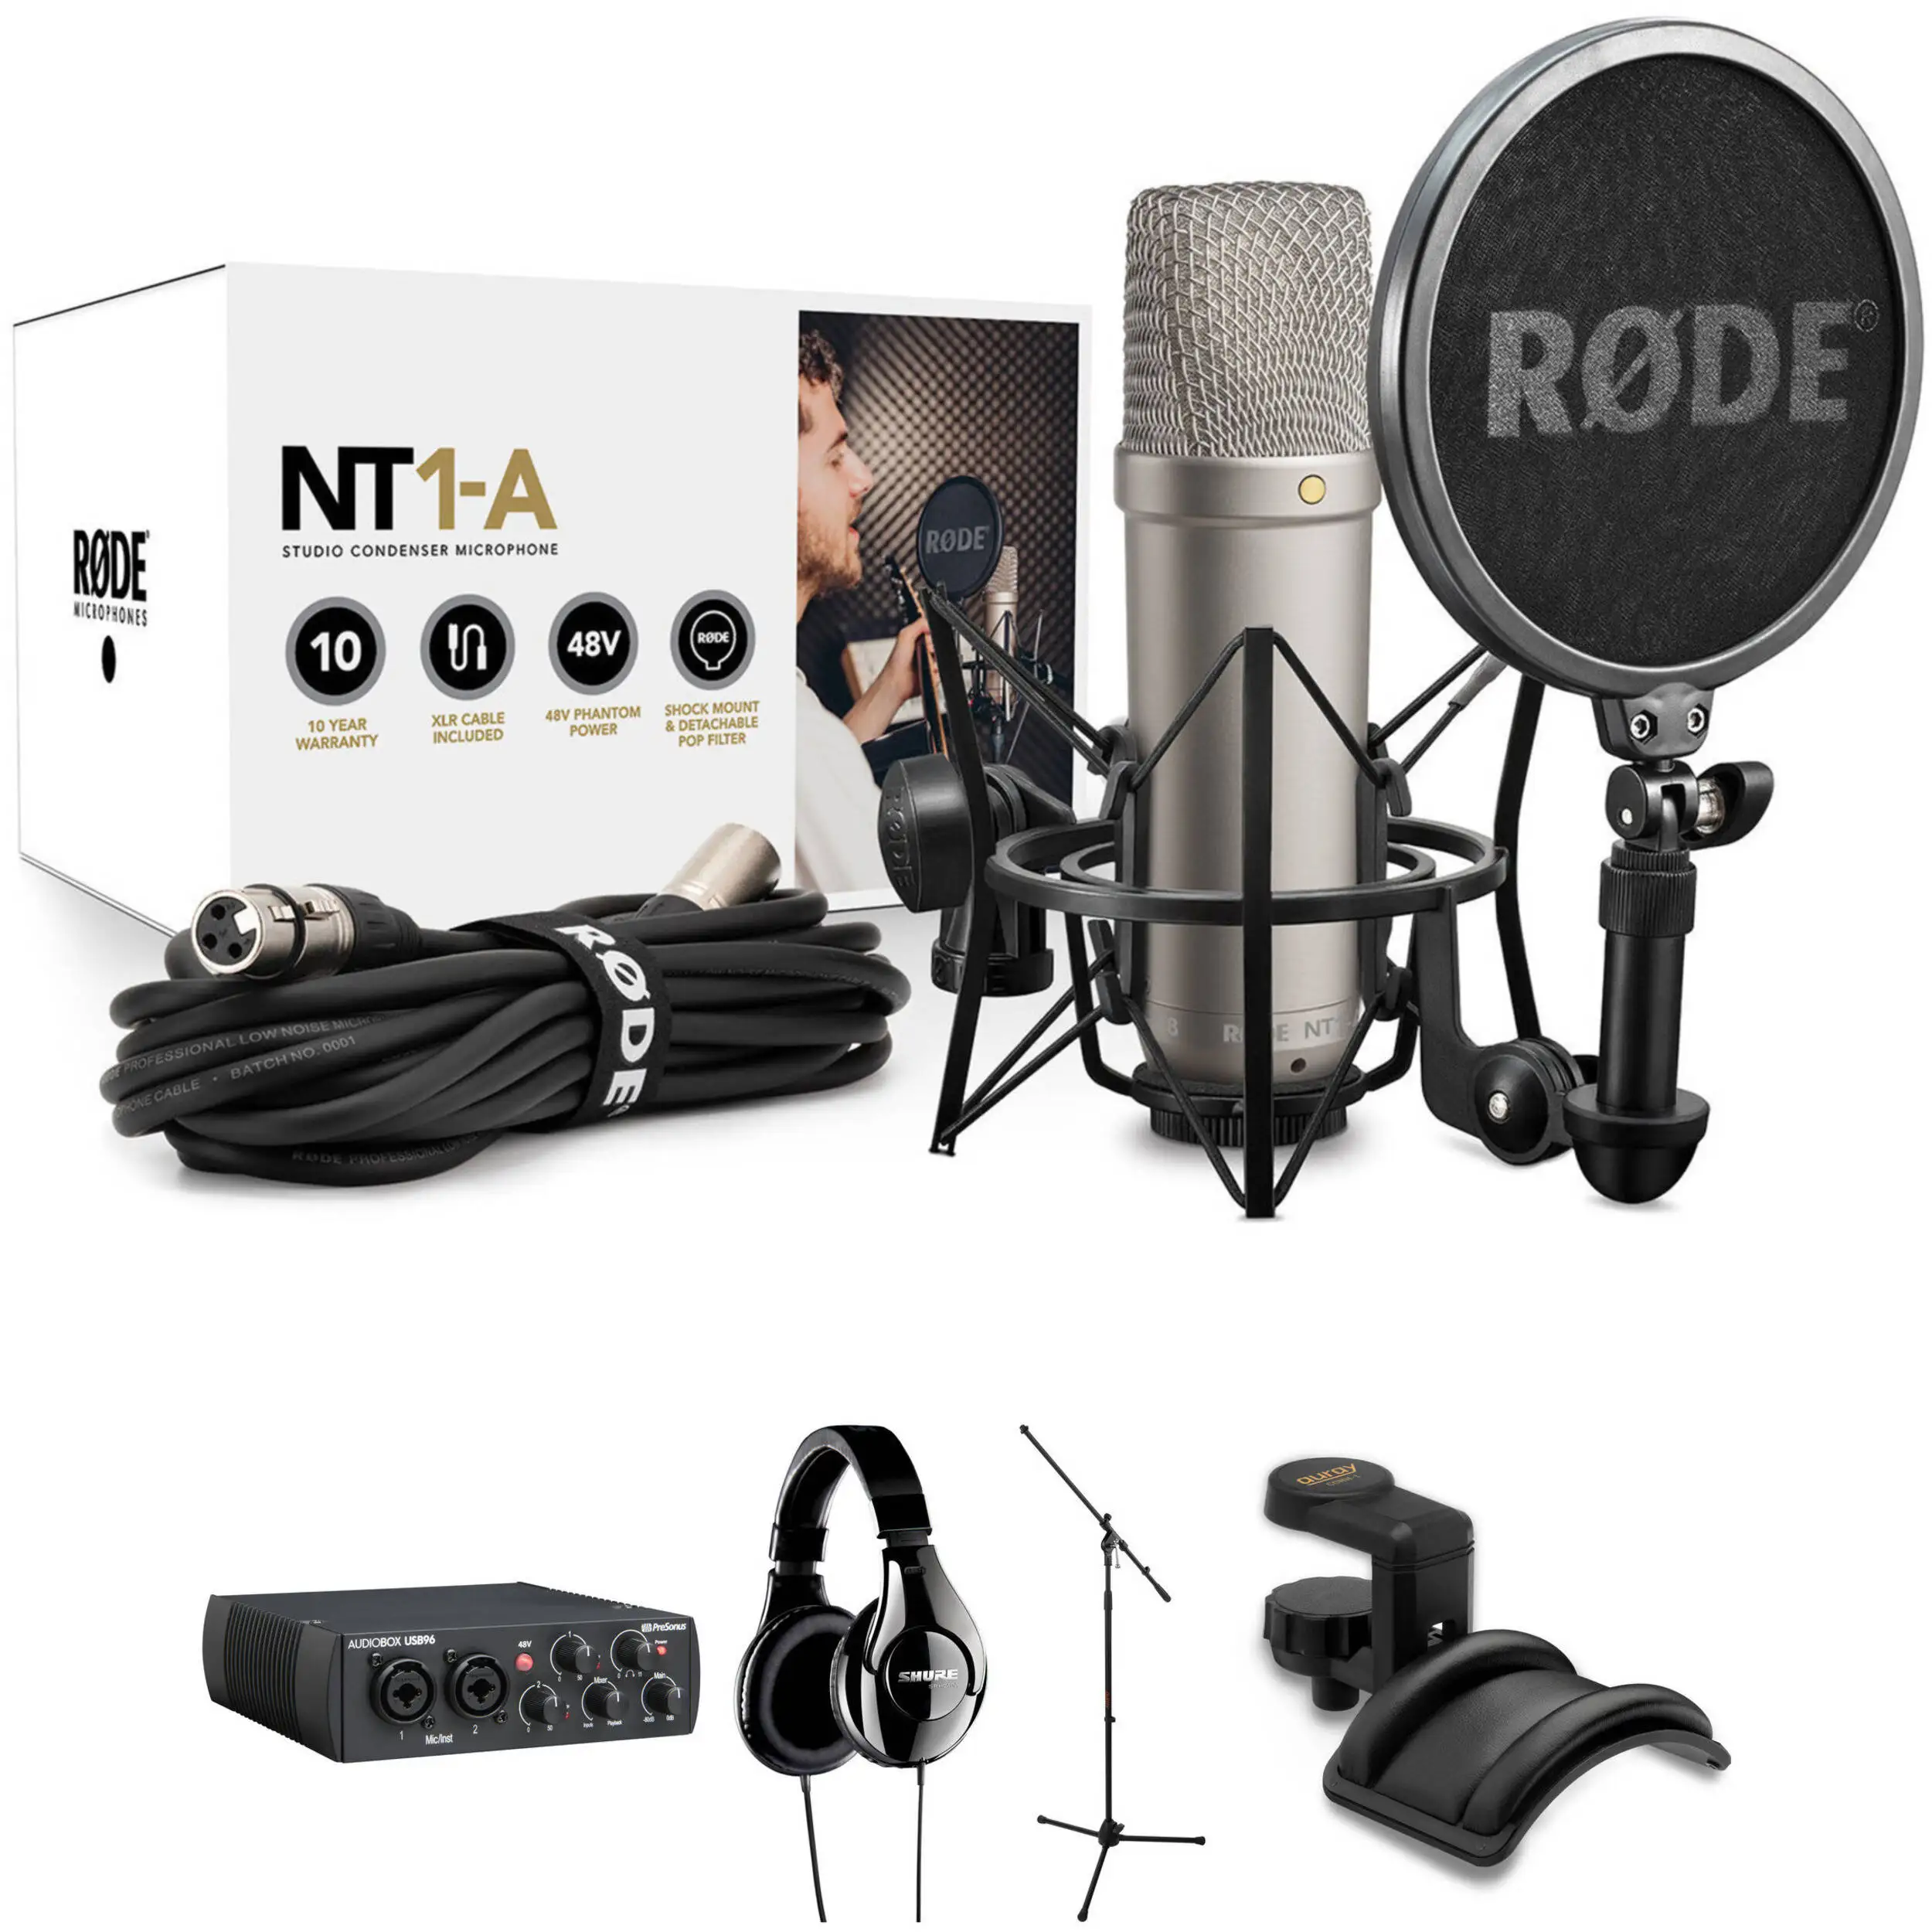 Audio　Stand　Vocal　Kit　Mic　Headphones　Rode　with　Interface,　NT1-A　Recording　AliExpress